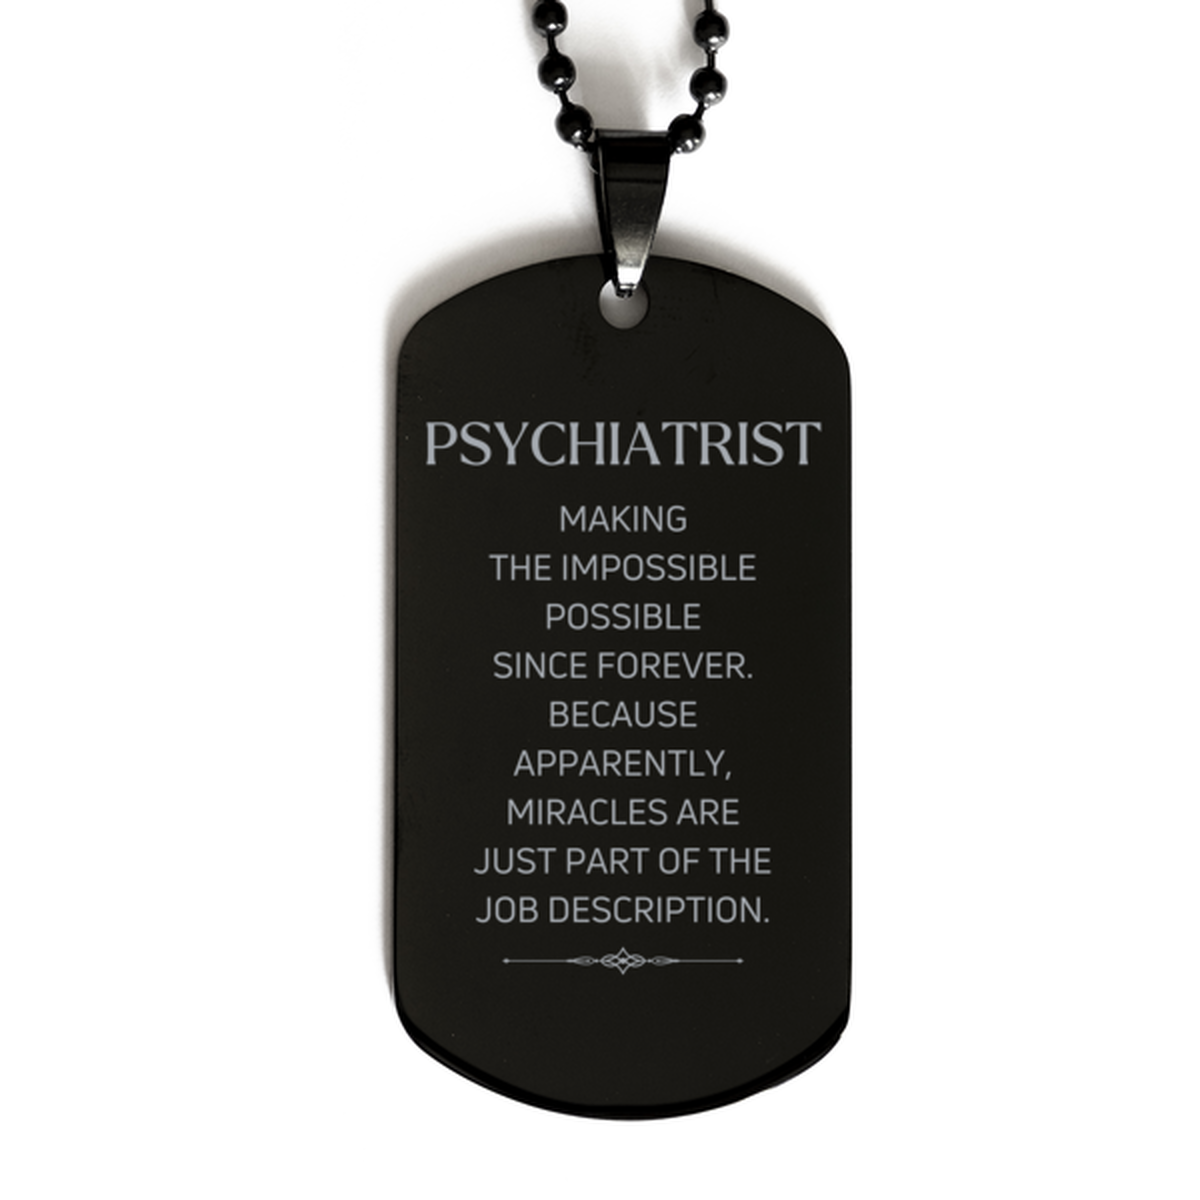 Funny Psychiatrist Gifts, Miracles are just part of the job description, Inspirational Birthday Black Dog Tag For Psychiatrist, Men, Women, Coworkers, Friends, Boss